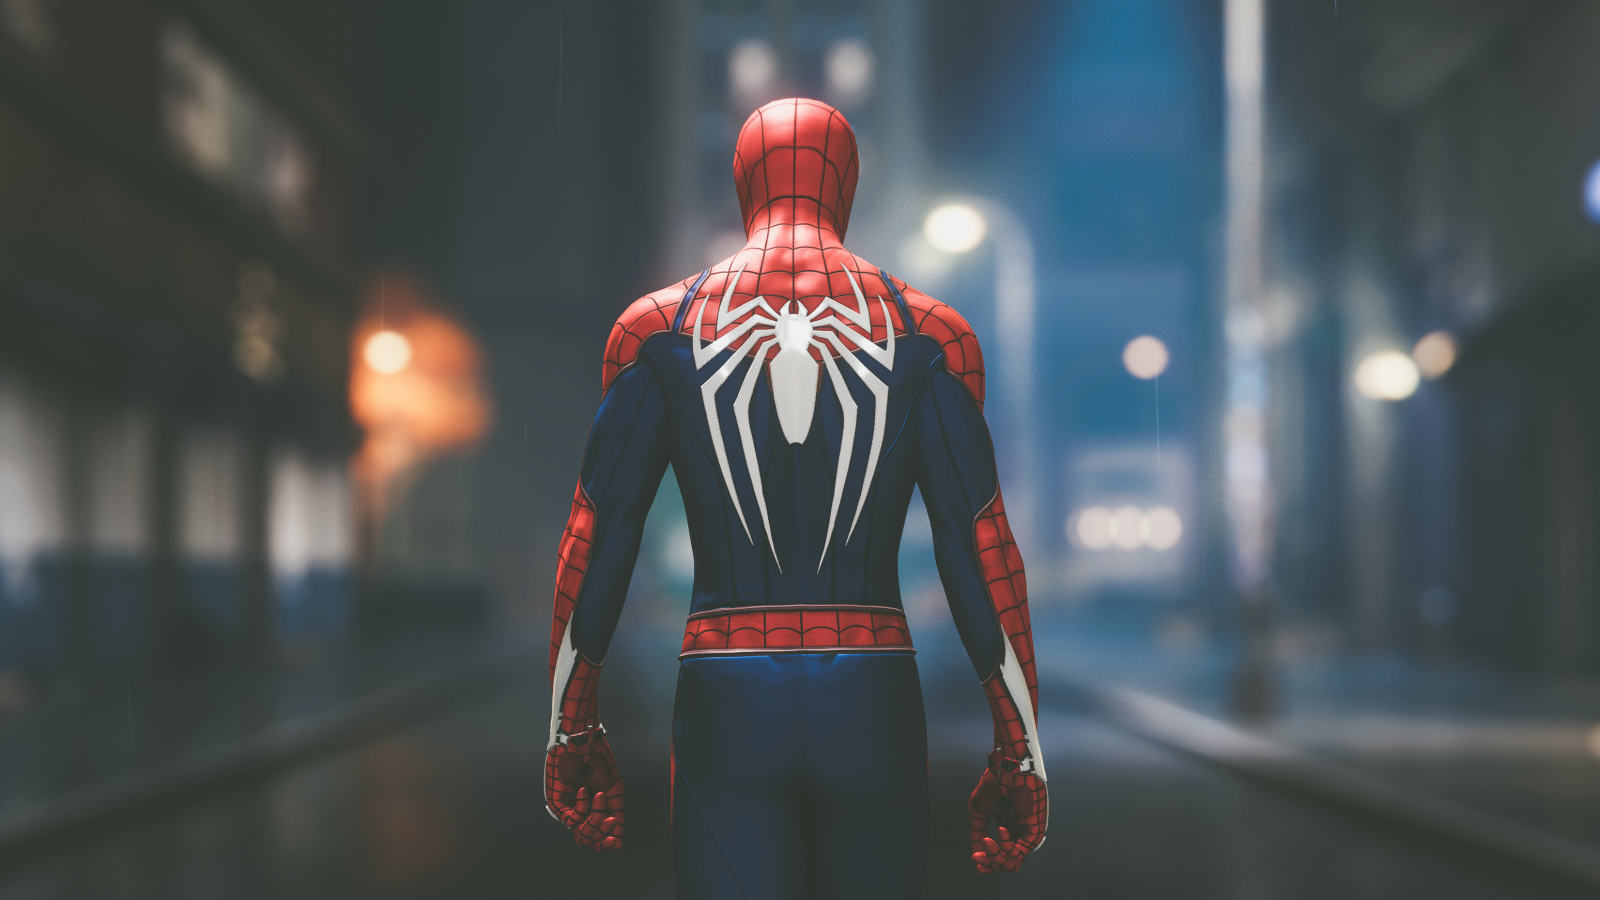 Download wallpaper 1600x900 video game, marvel, ps4, spider-man, 16:9 widescreen  1600x900 hd background, 15341